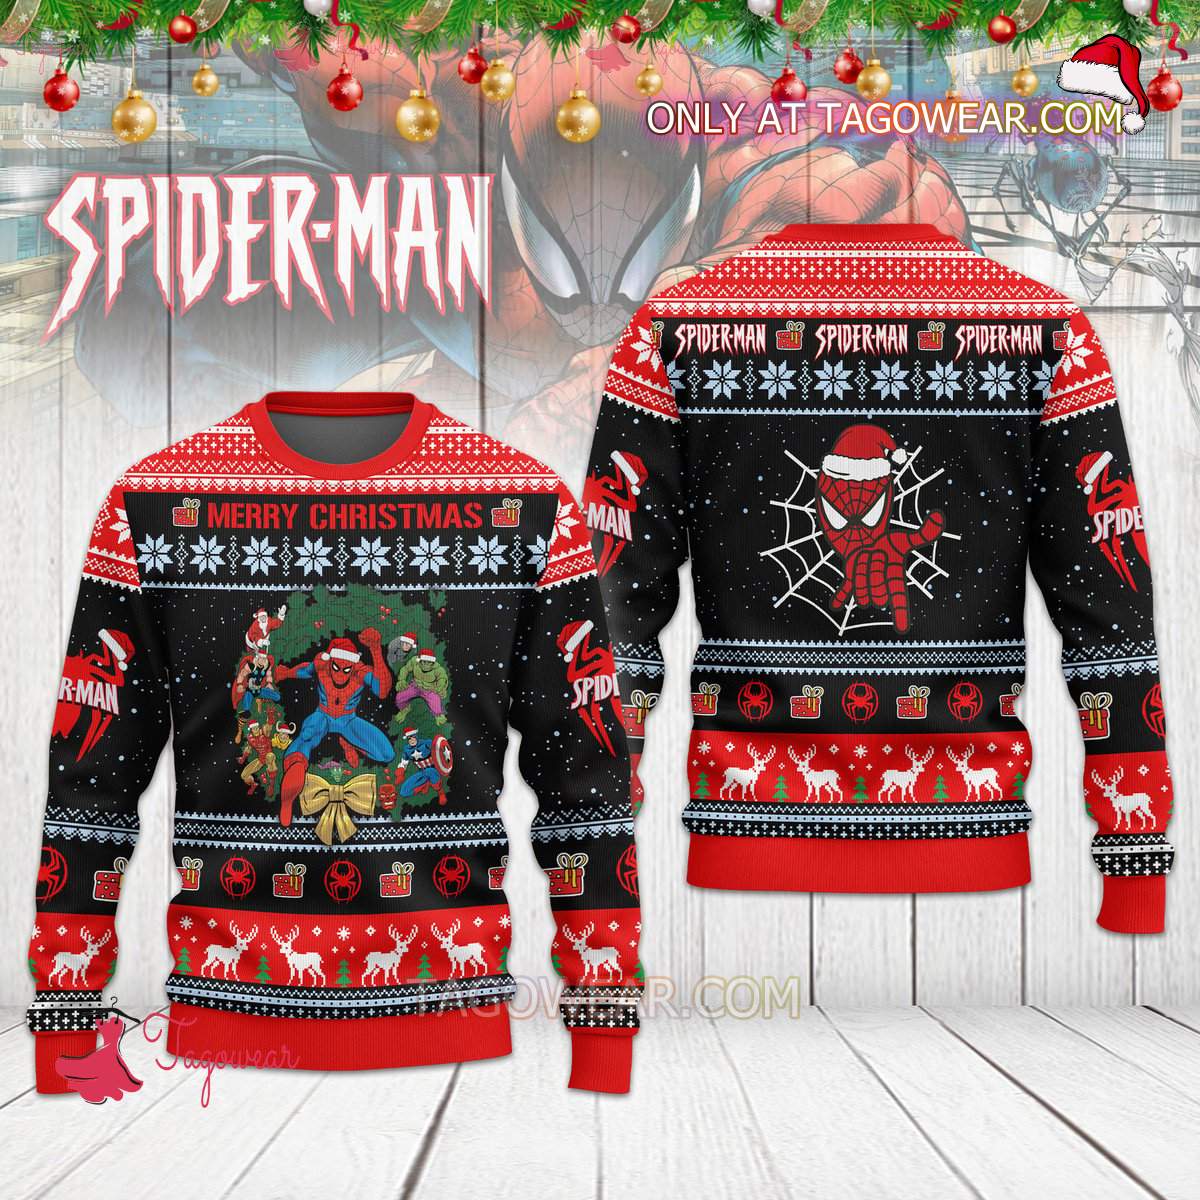 Spider-man Merry Christmas Sweater